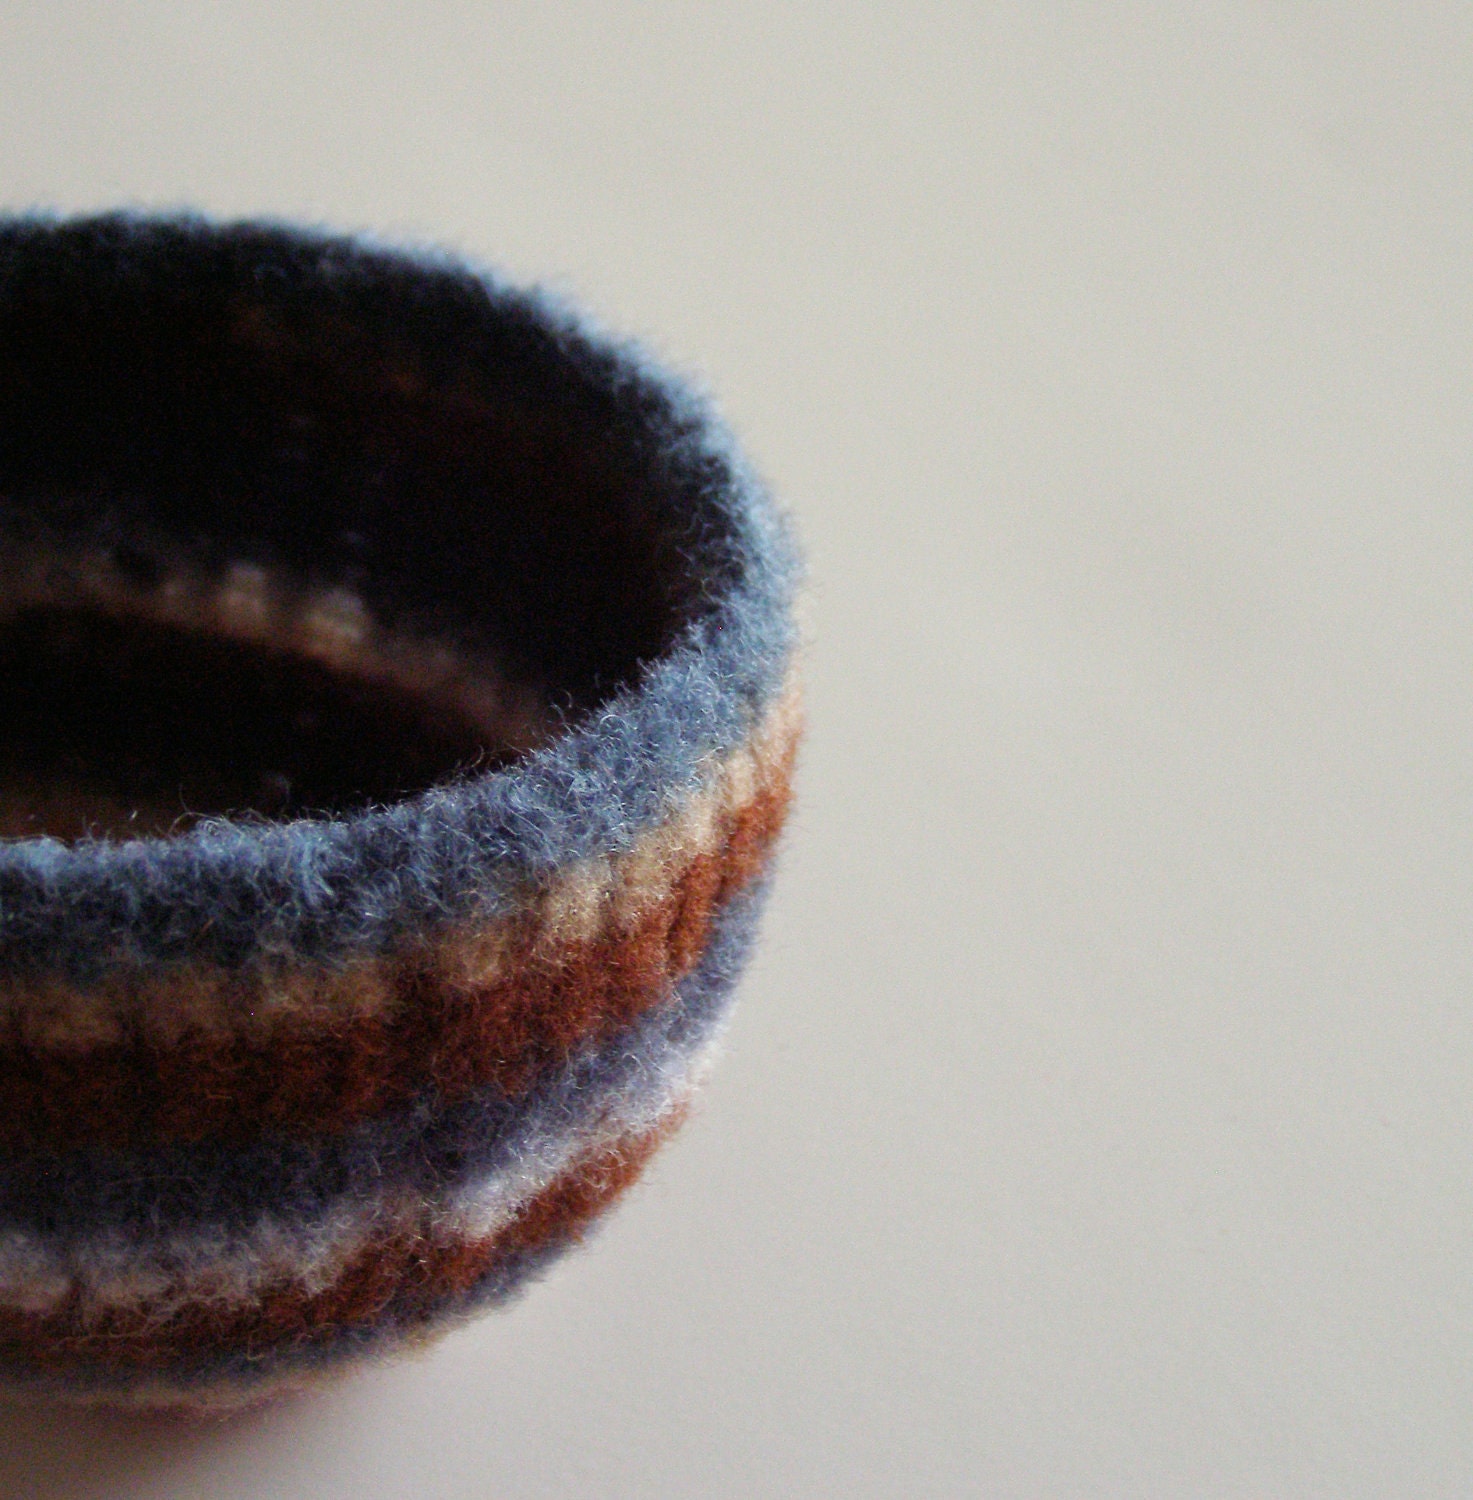 felted wool striped bowl - earth tone stripes of blue, brown, tan, nougat, chestnut, dark red, and yellow - desk organizer - back to school - theFelterie